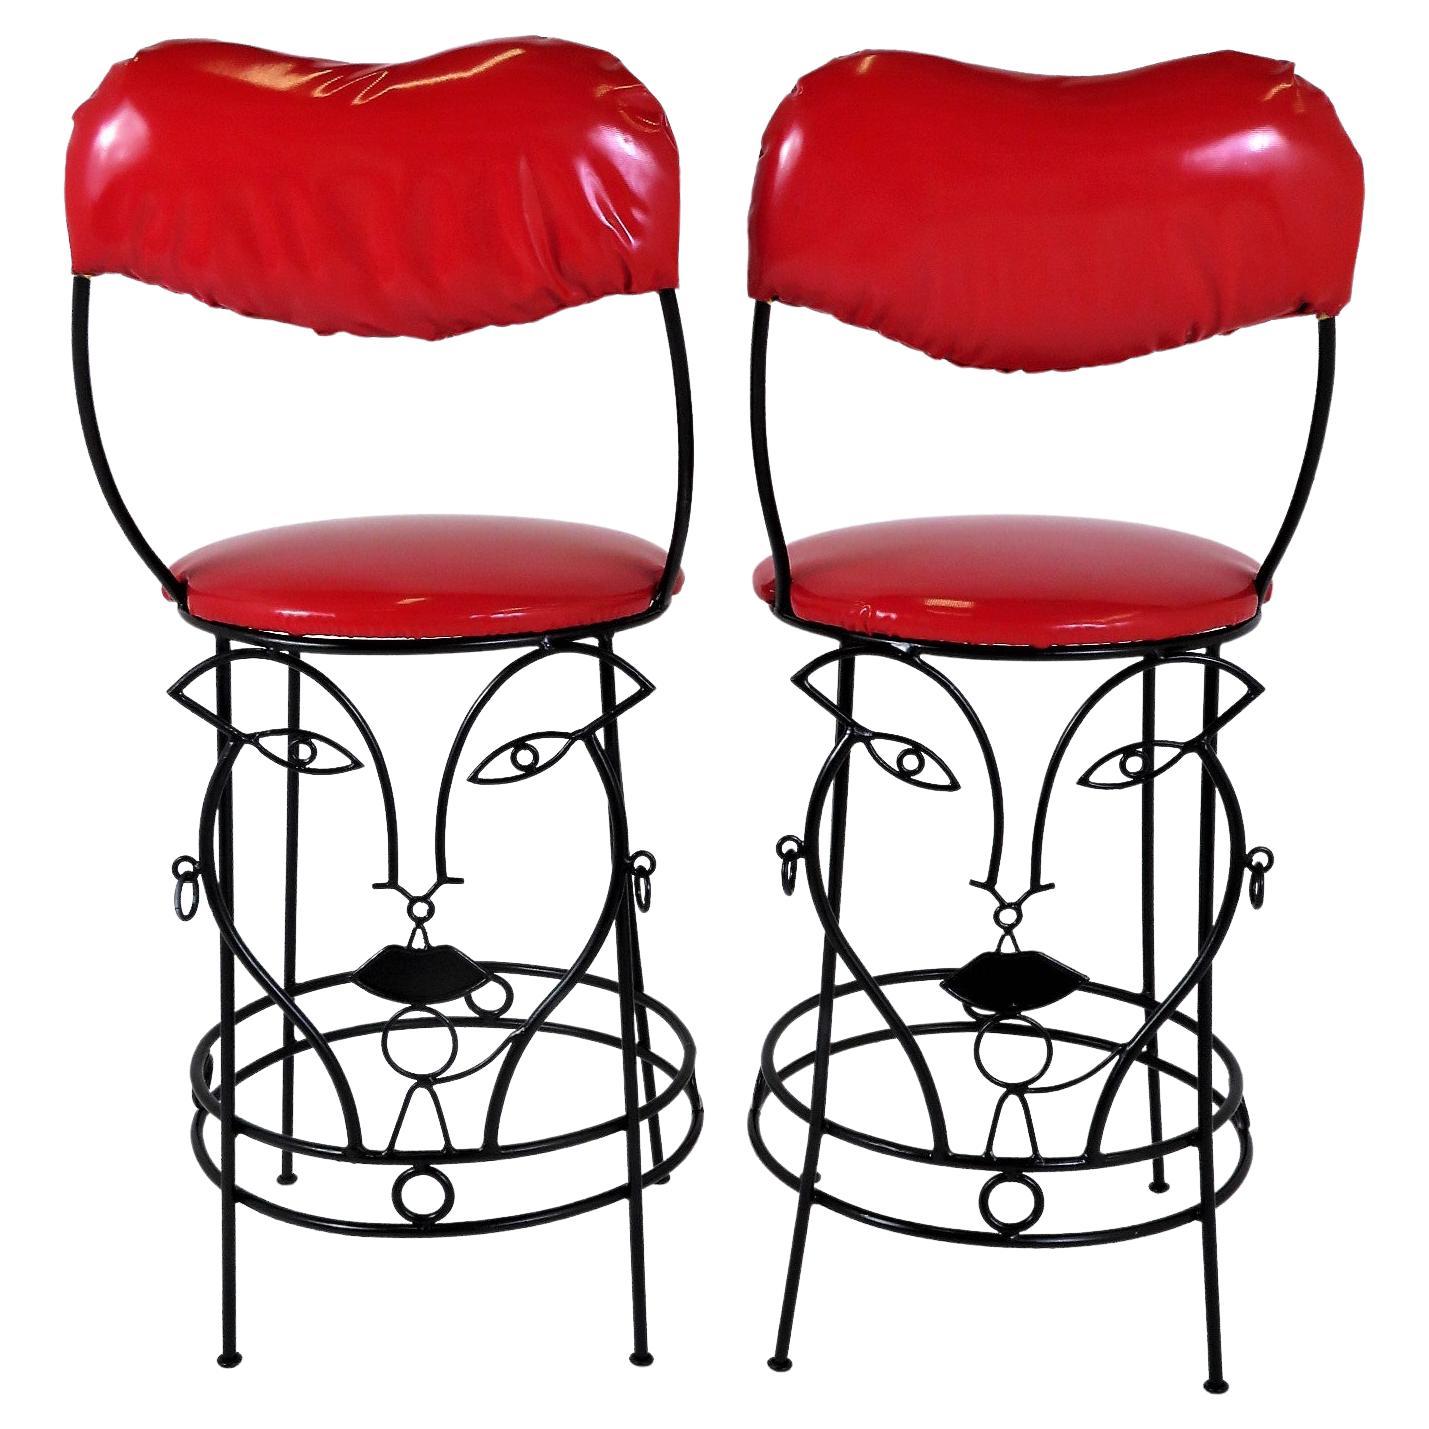 Unique and a delight, this pair of blackened wrought iron Bar Stools have John Risley style faces on their lower half.  The candy apple red vinyl seat and lips inspired back cushion are vintage upholstery in fine order.  The faces are feminine and